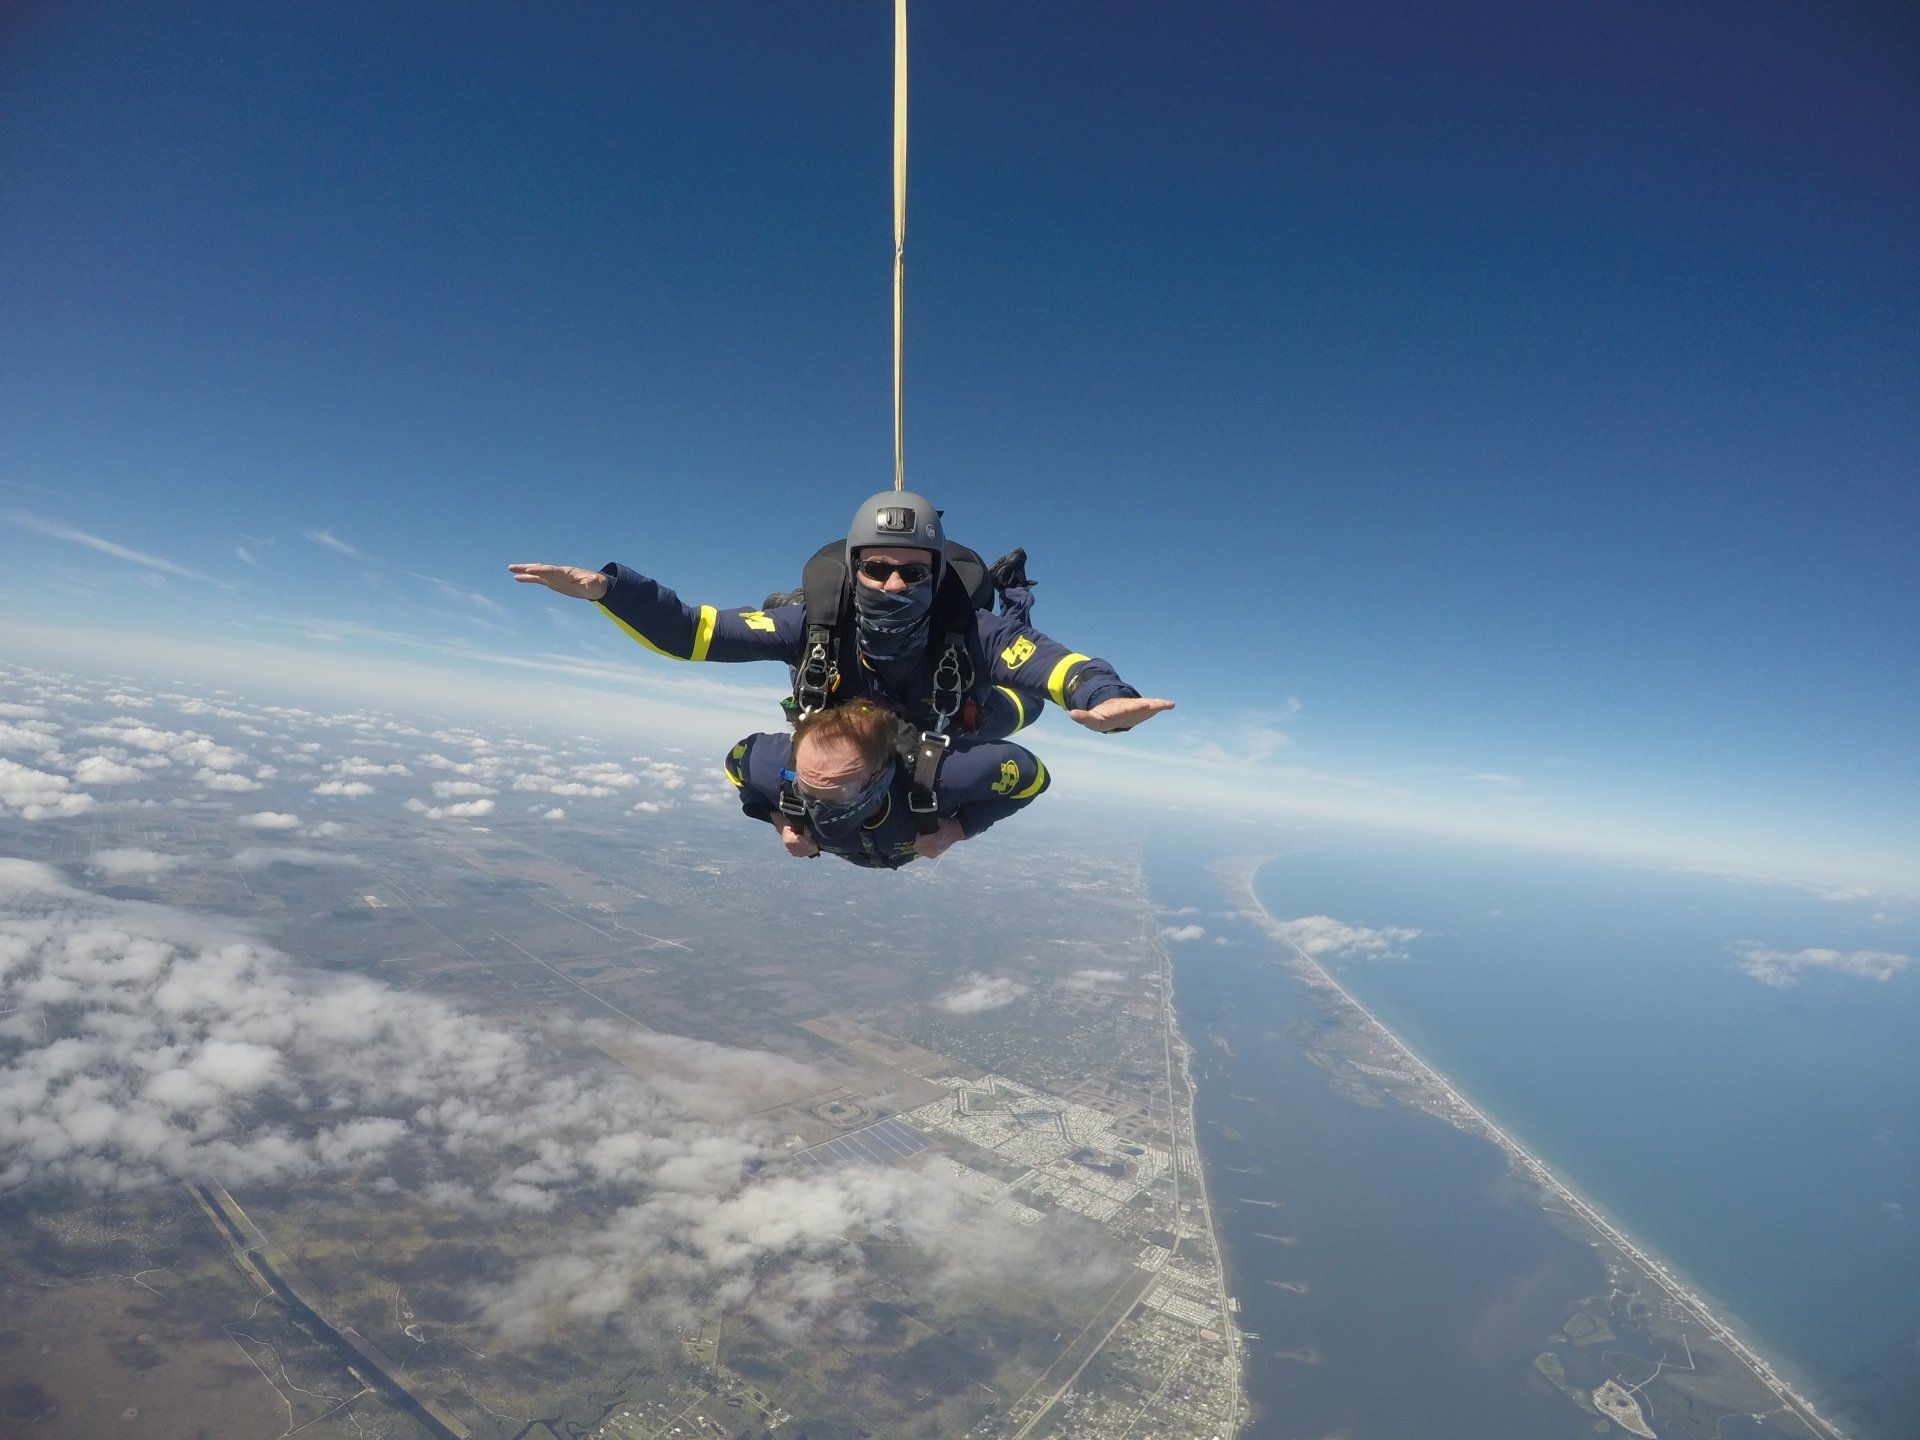 Fastest time to tandem skydive all seven continents: James C. Wigginton and Thomas J. Noonan lll set world record / North America - Florida